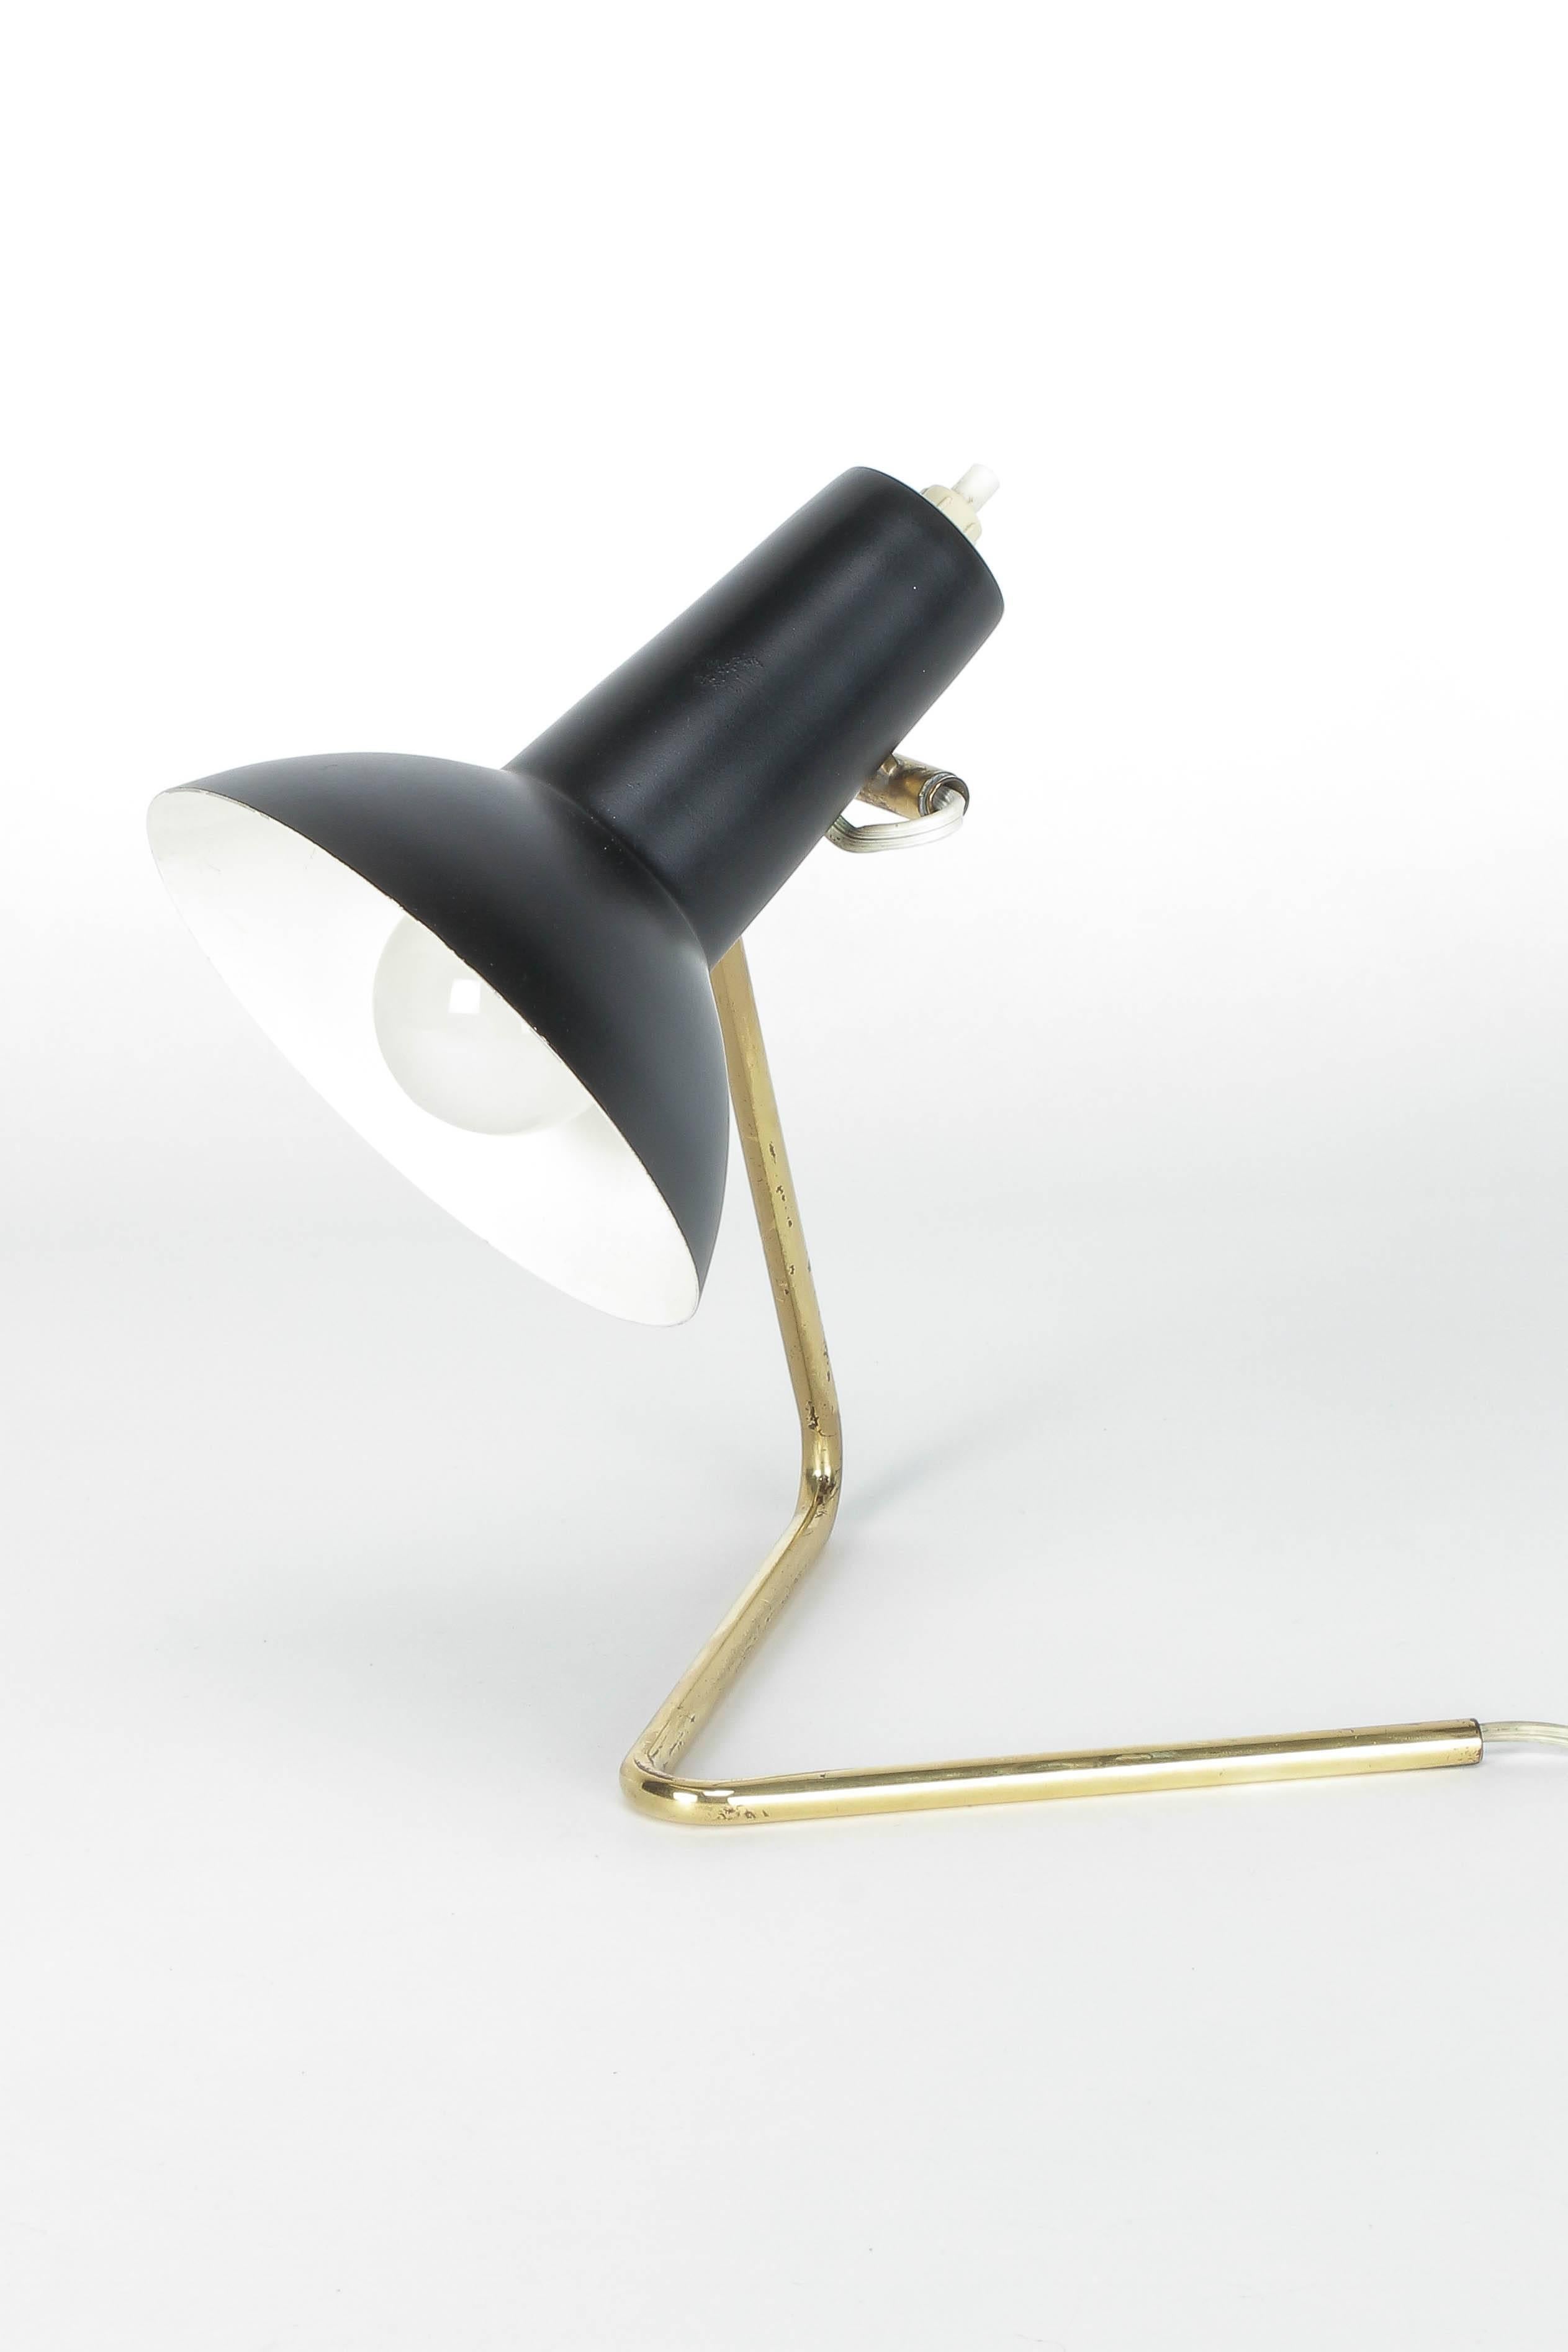 An incredibly rare Gino Sarfatti lamp, model 551 manufactured by Arteluce in 1952. Black lacquered shade, rotates on a horizontal plane by friction joint. Structure in polished brass tubing, can be positioned on the desk or wall. All parts are in